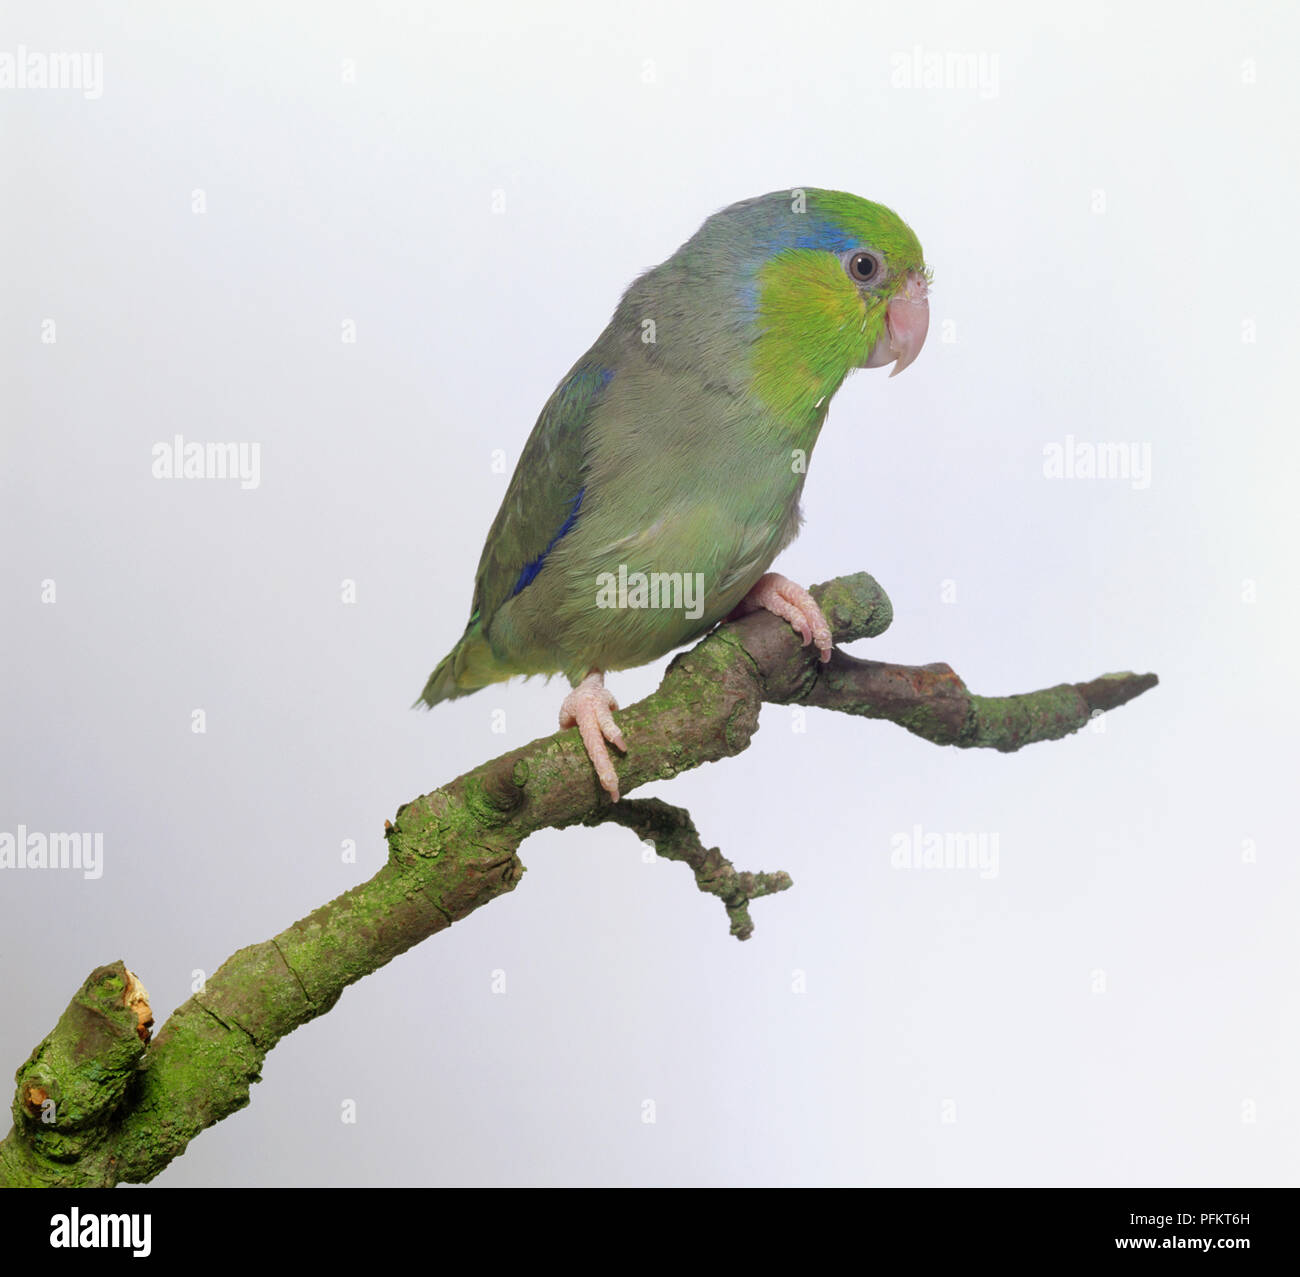 Pacific parrotlet (Forpus coelistis), small green and blue parrot sitting on a branch, side view Stock Photo